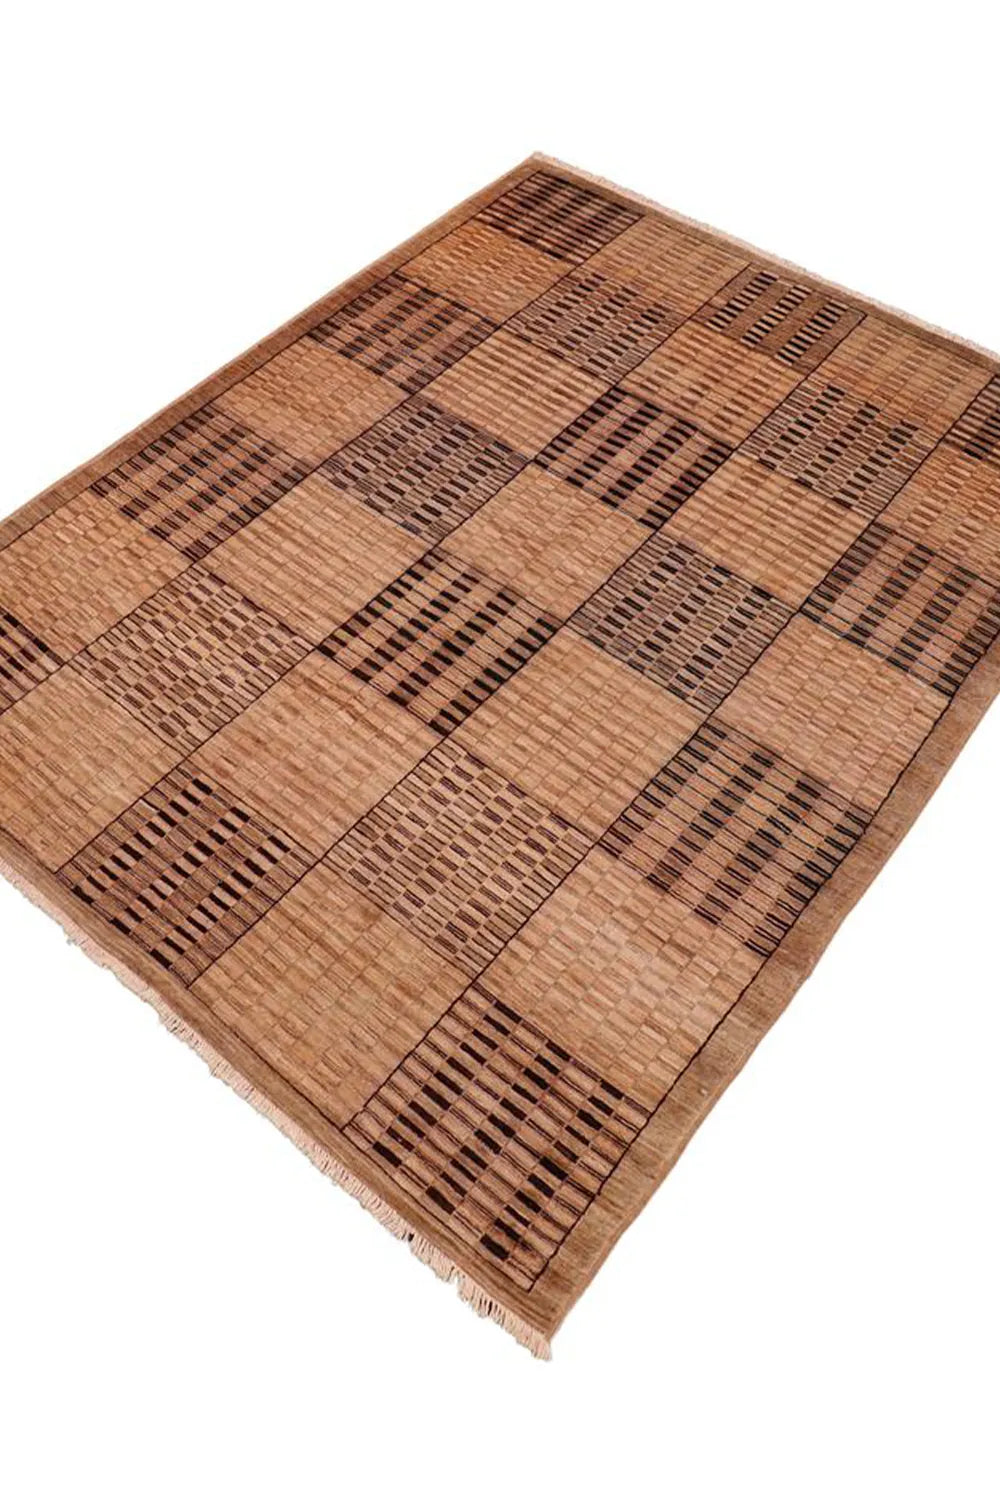 Square pattern hand-knotted rug in shades of brown and tan.